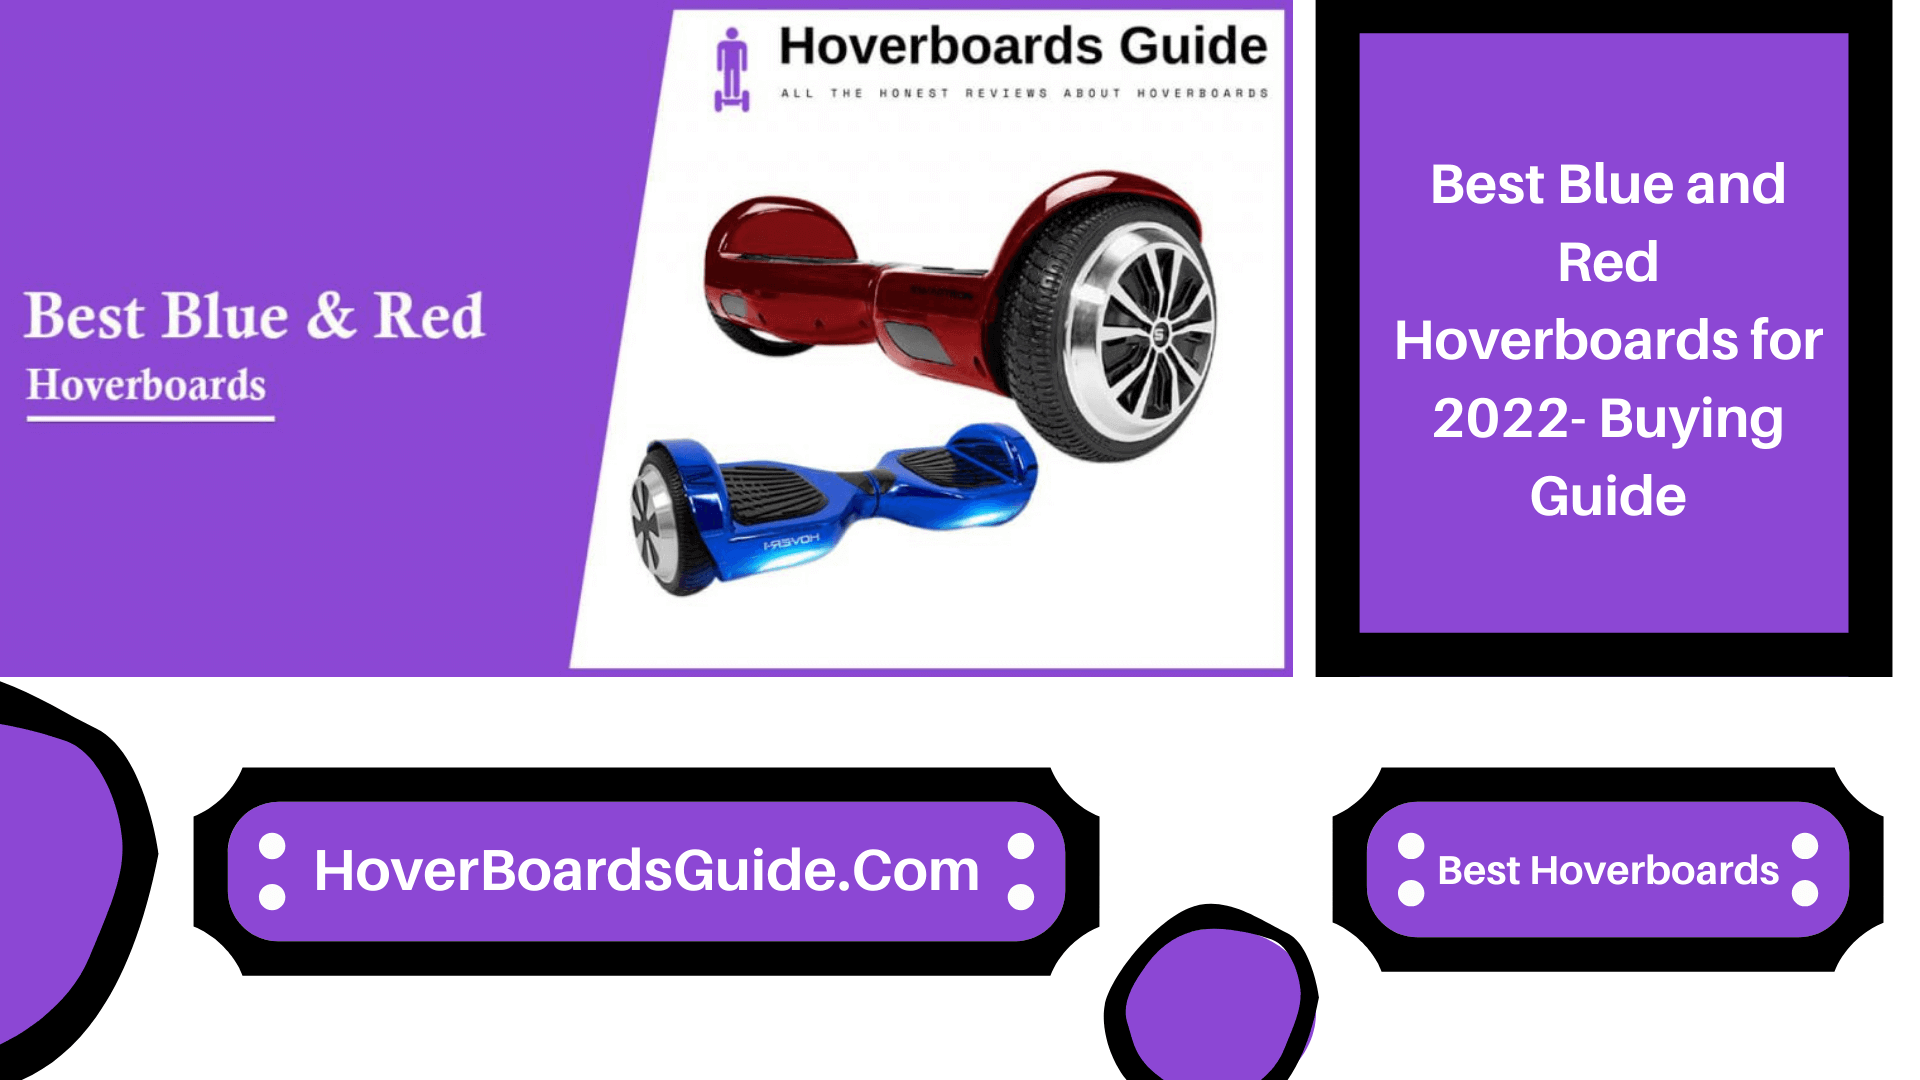 Best Blue and Red Hoverboards for 2022- Buying Guide